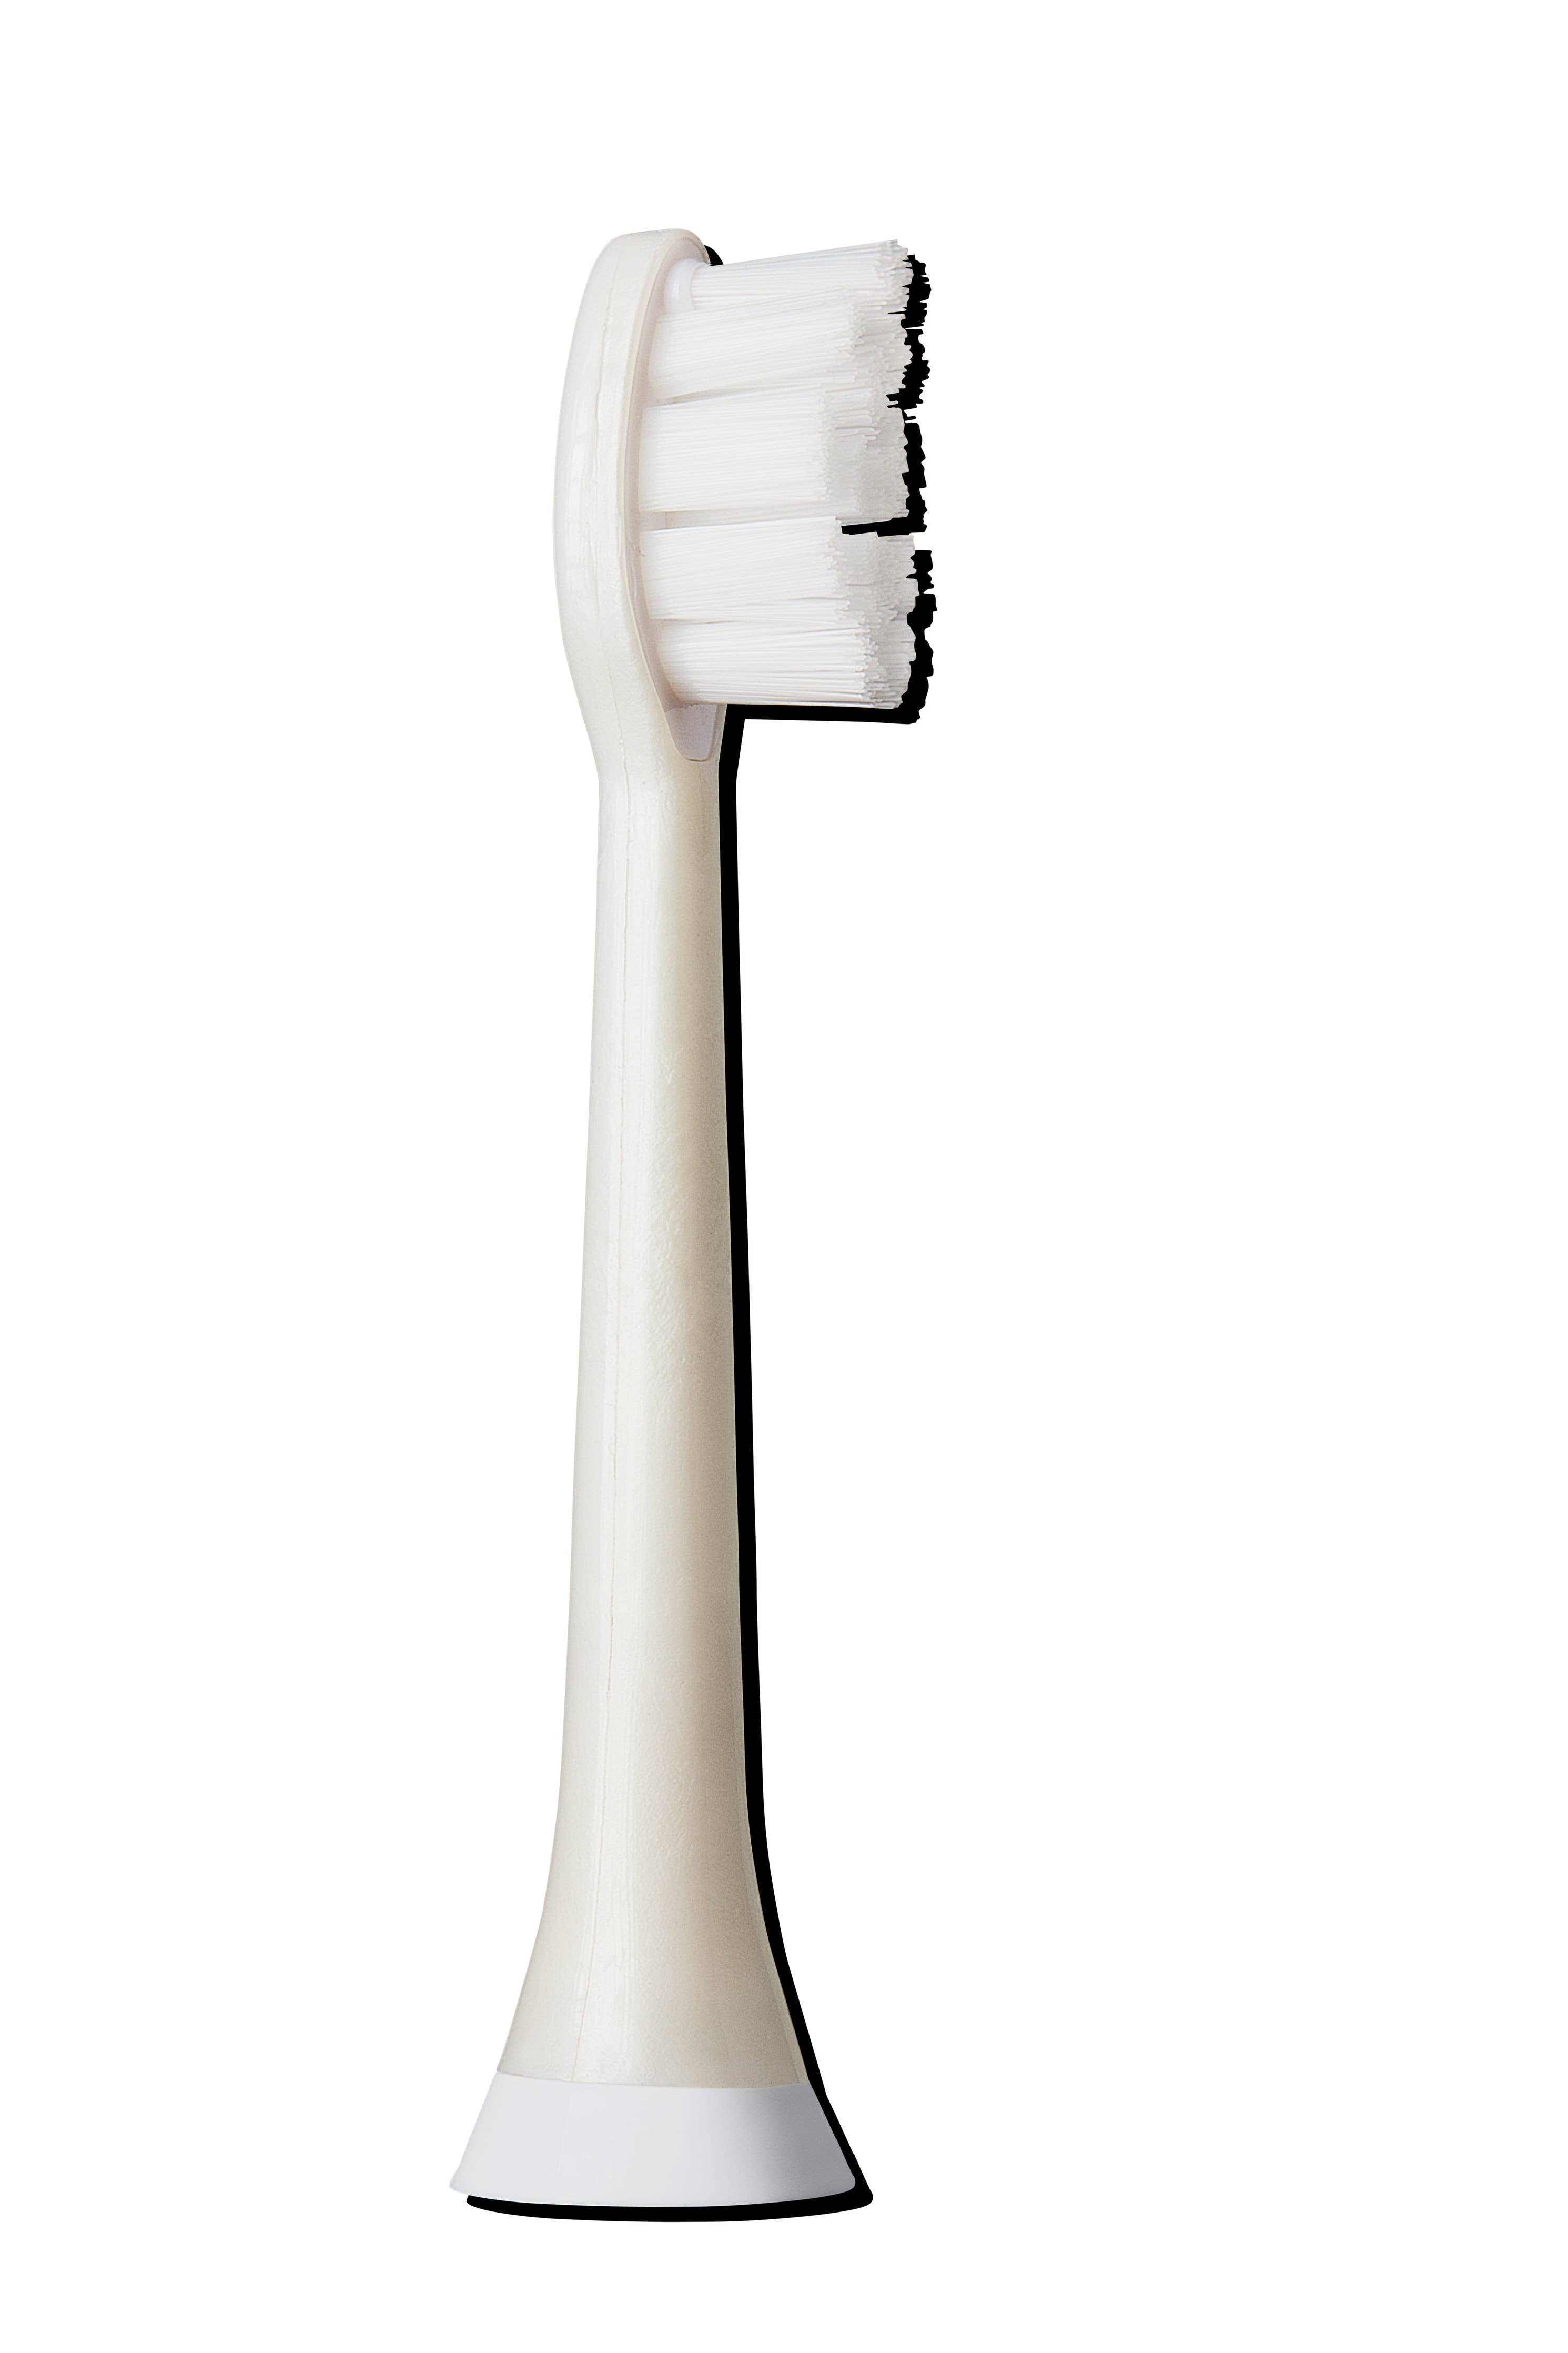 Biodegradable Electric Toothbrush Replacement Heads Sonicare